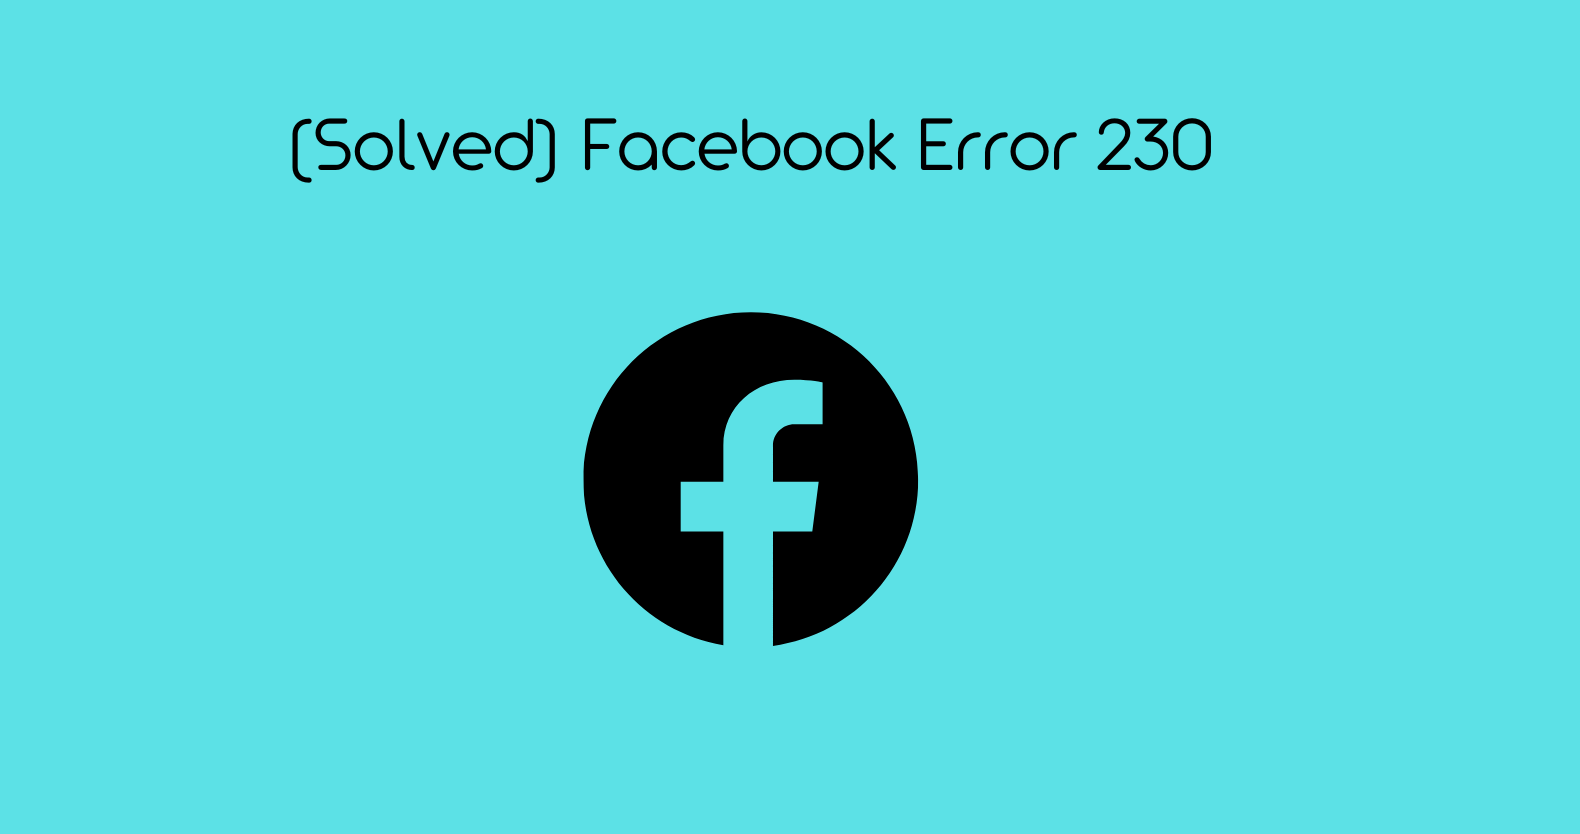 (Solved) Facebook Error 230 – Causes, Solutions, and Everything